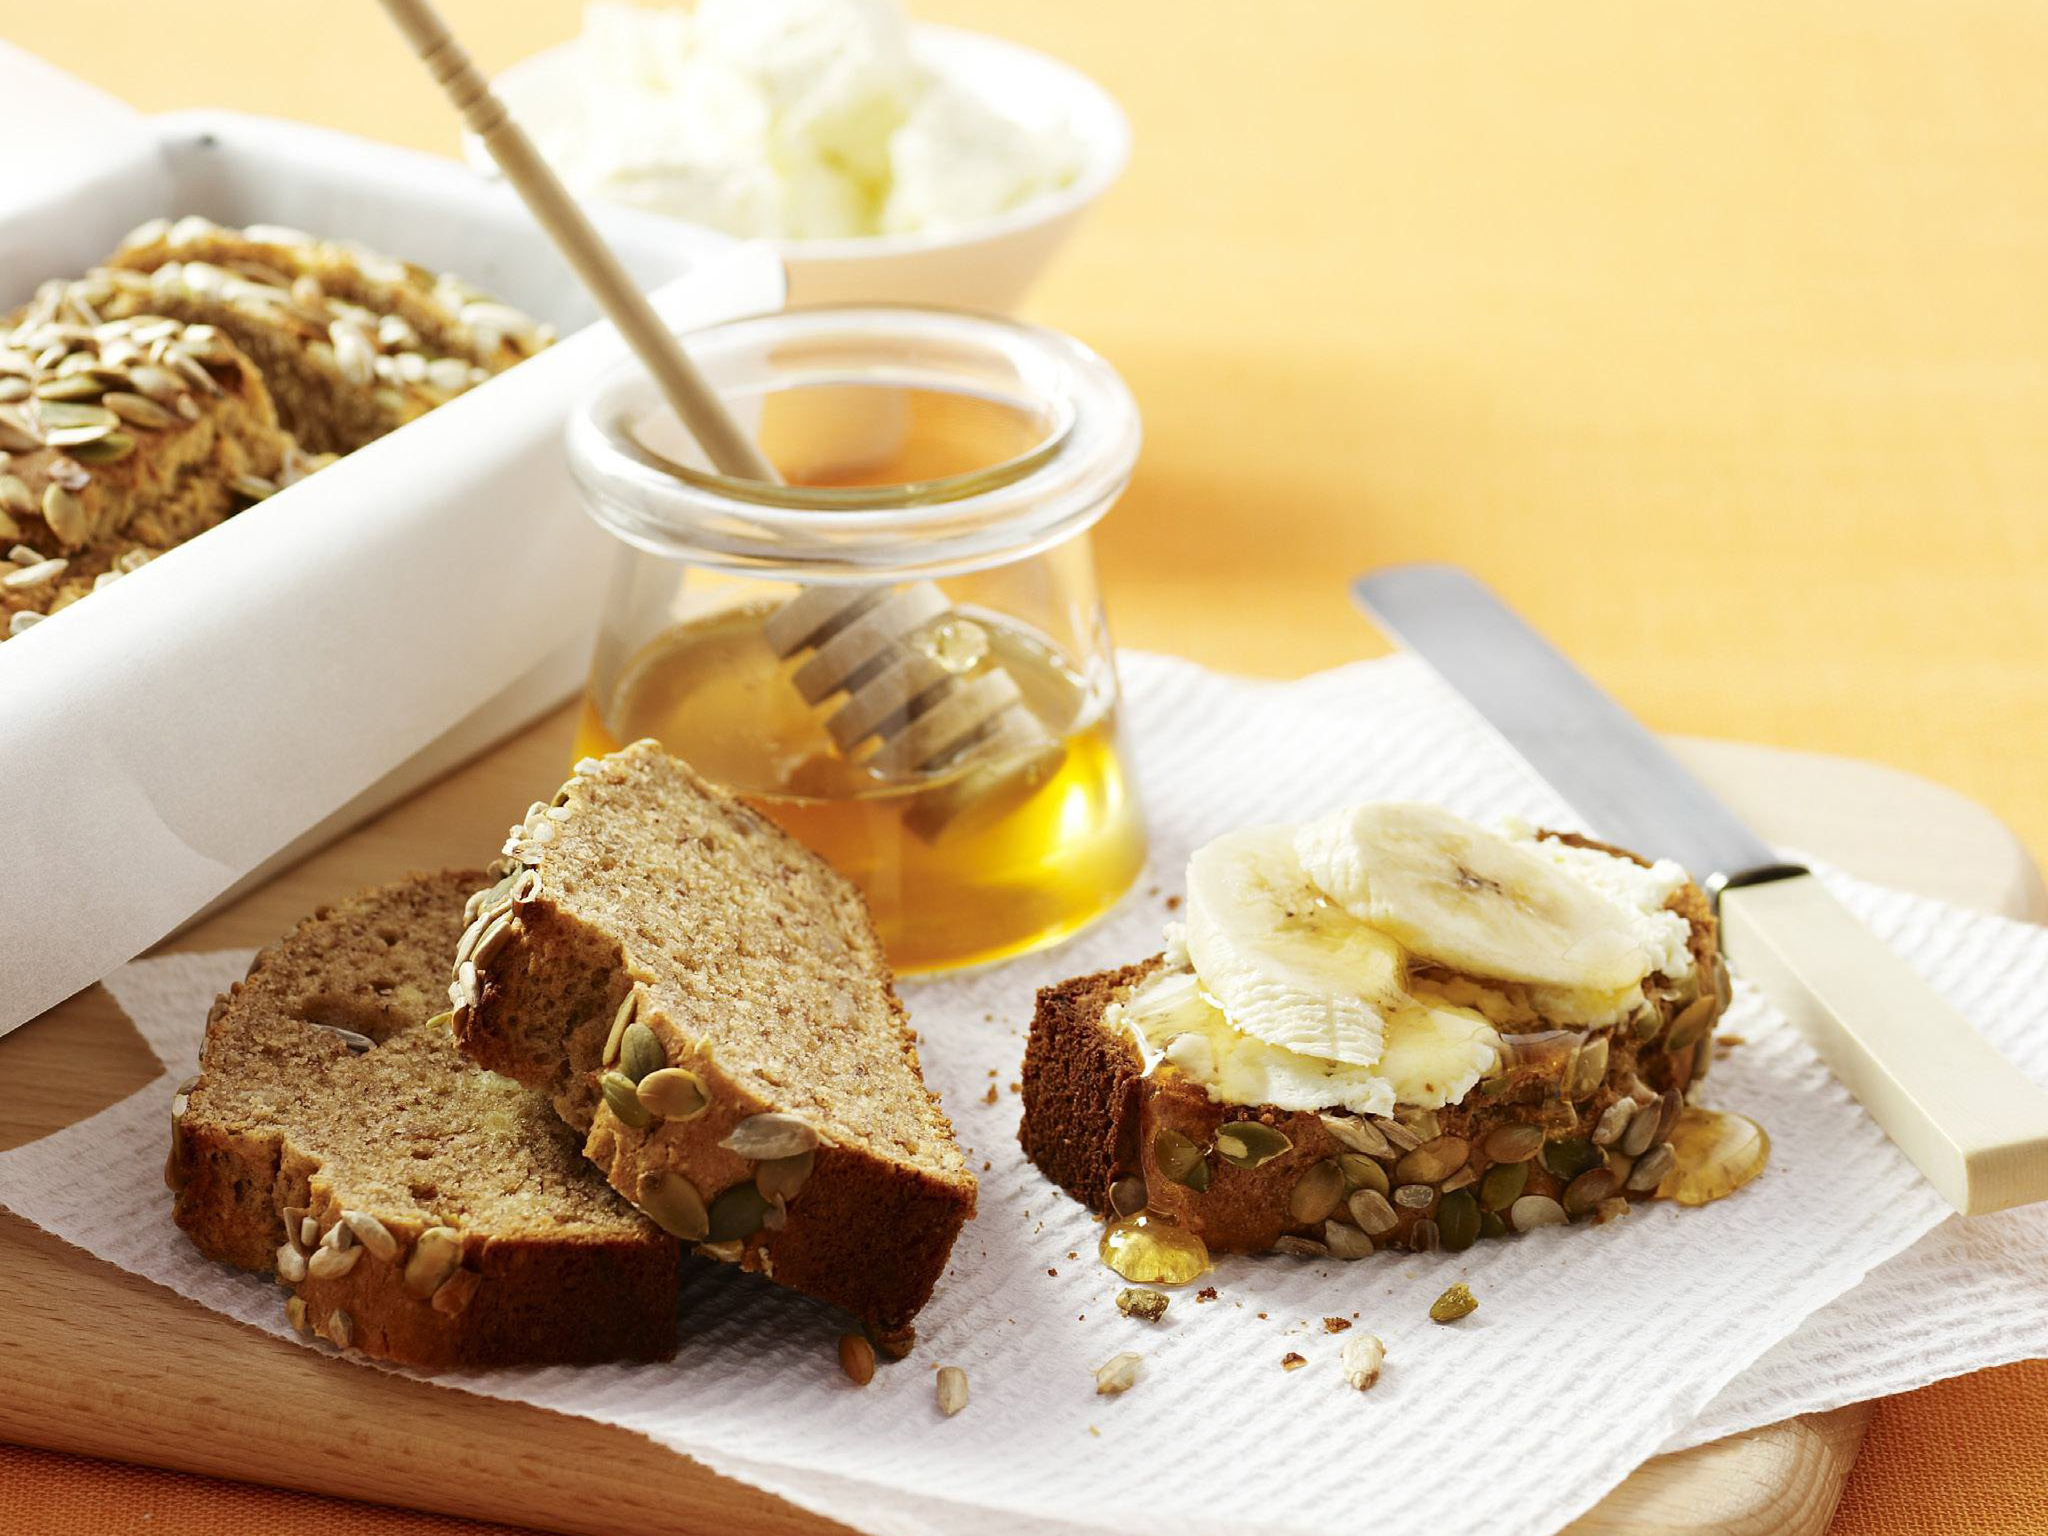 Banana bread with seeds